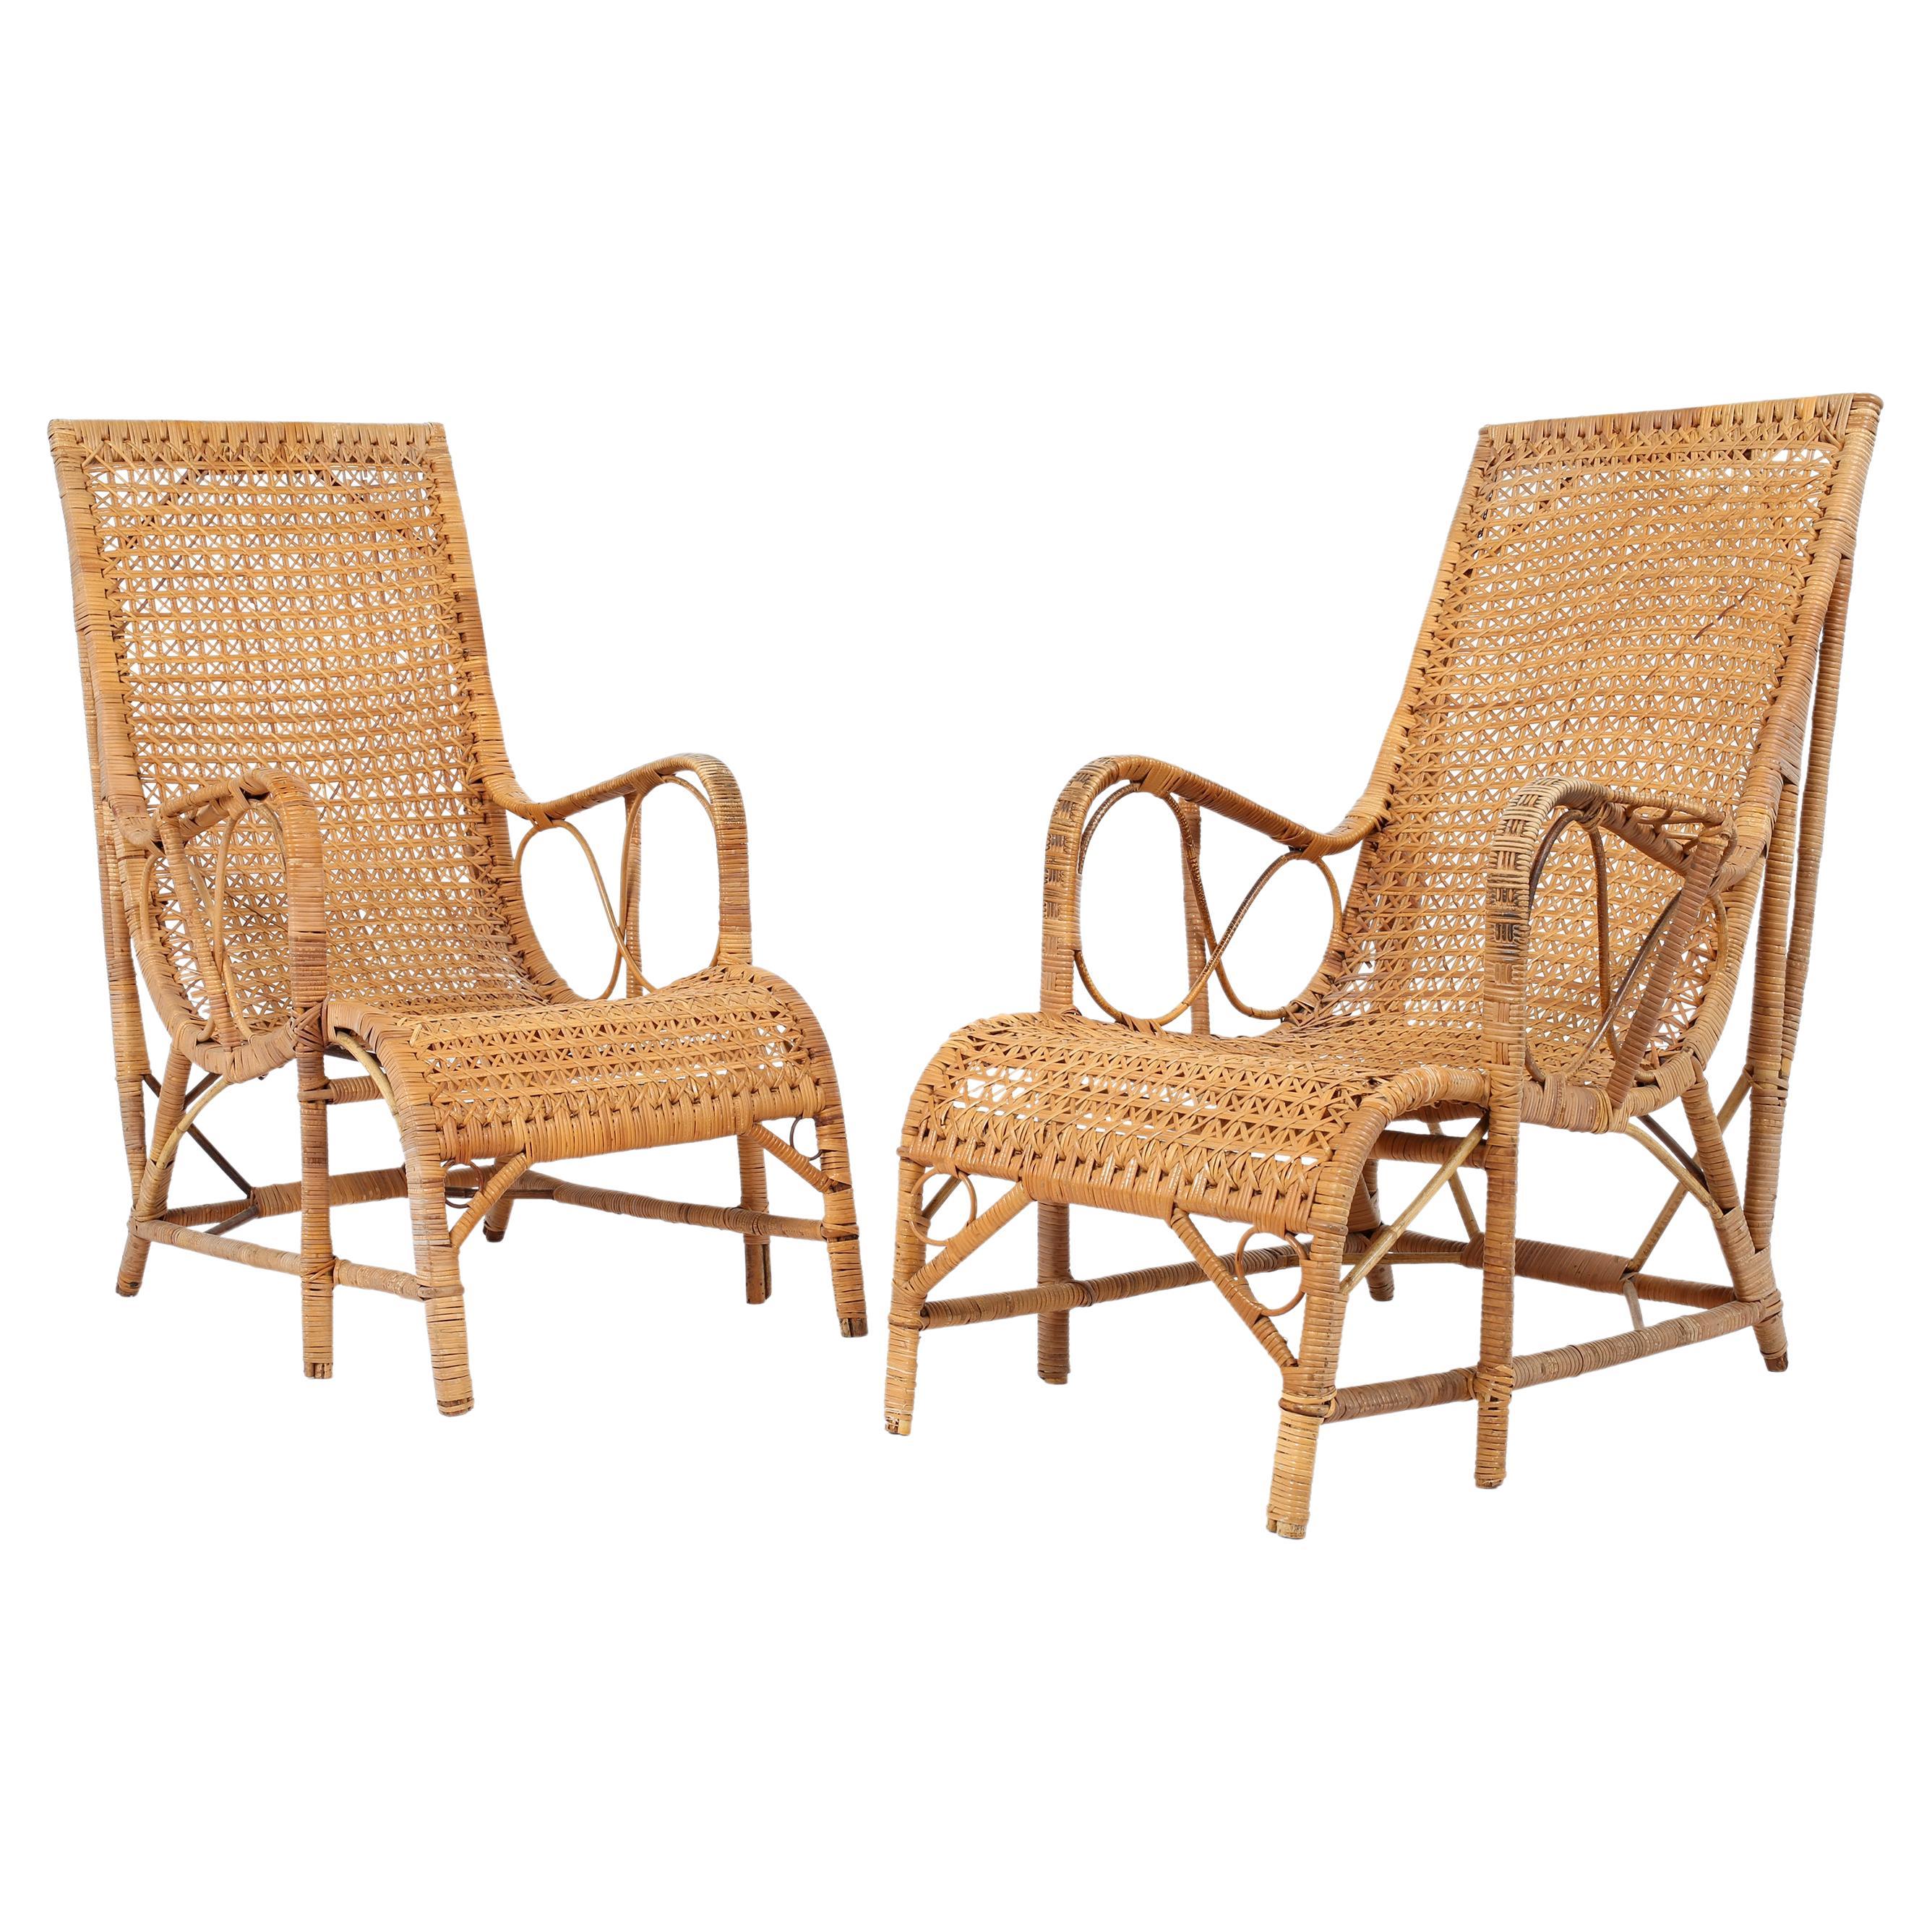 Pair of French 1940s Rattan Loungers